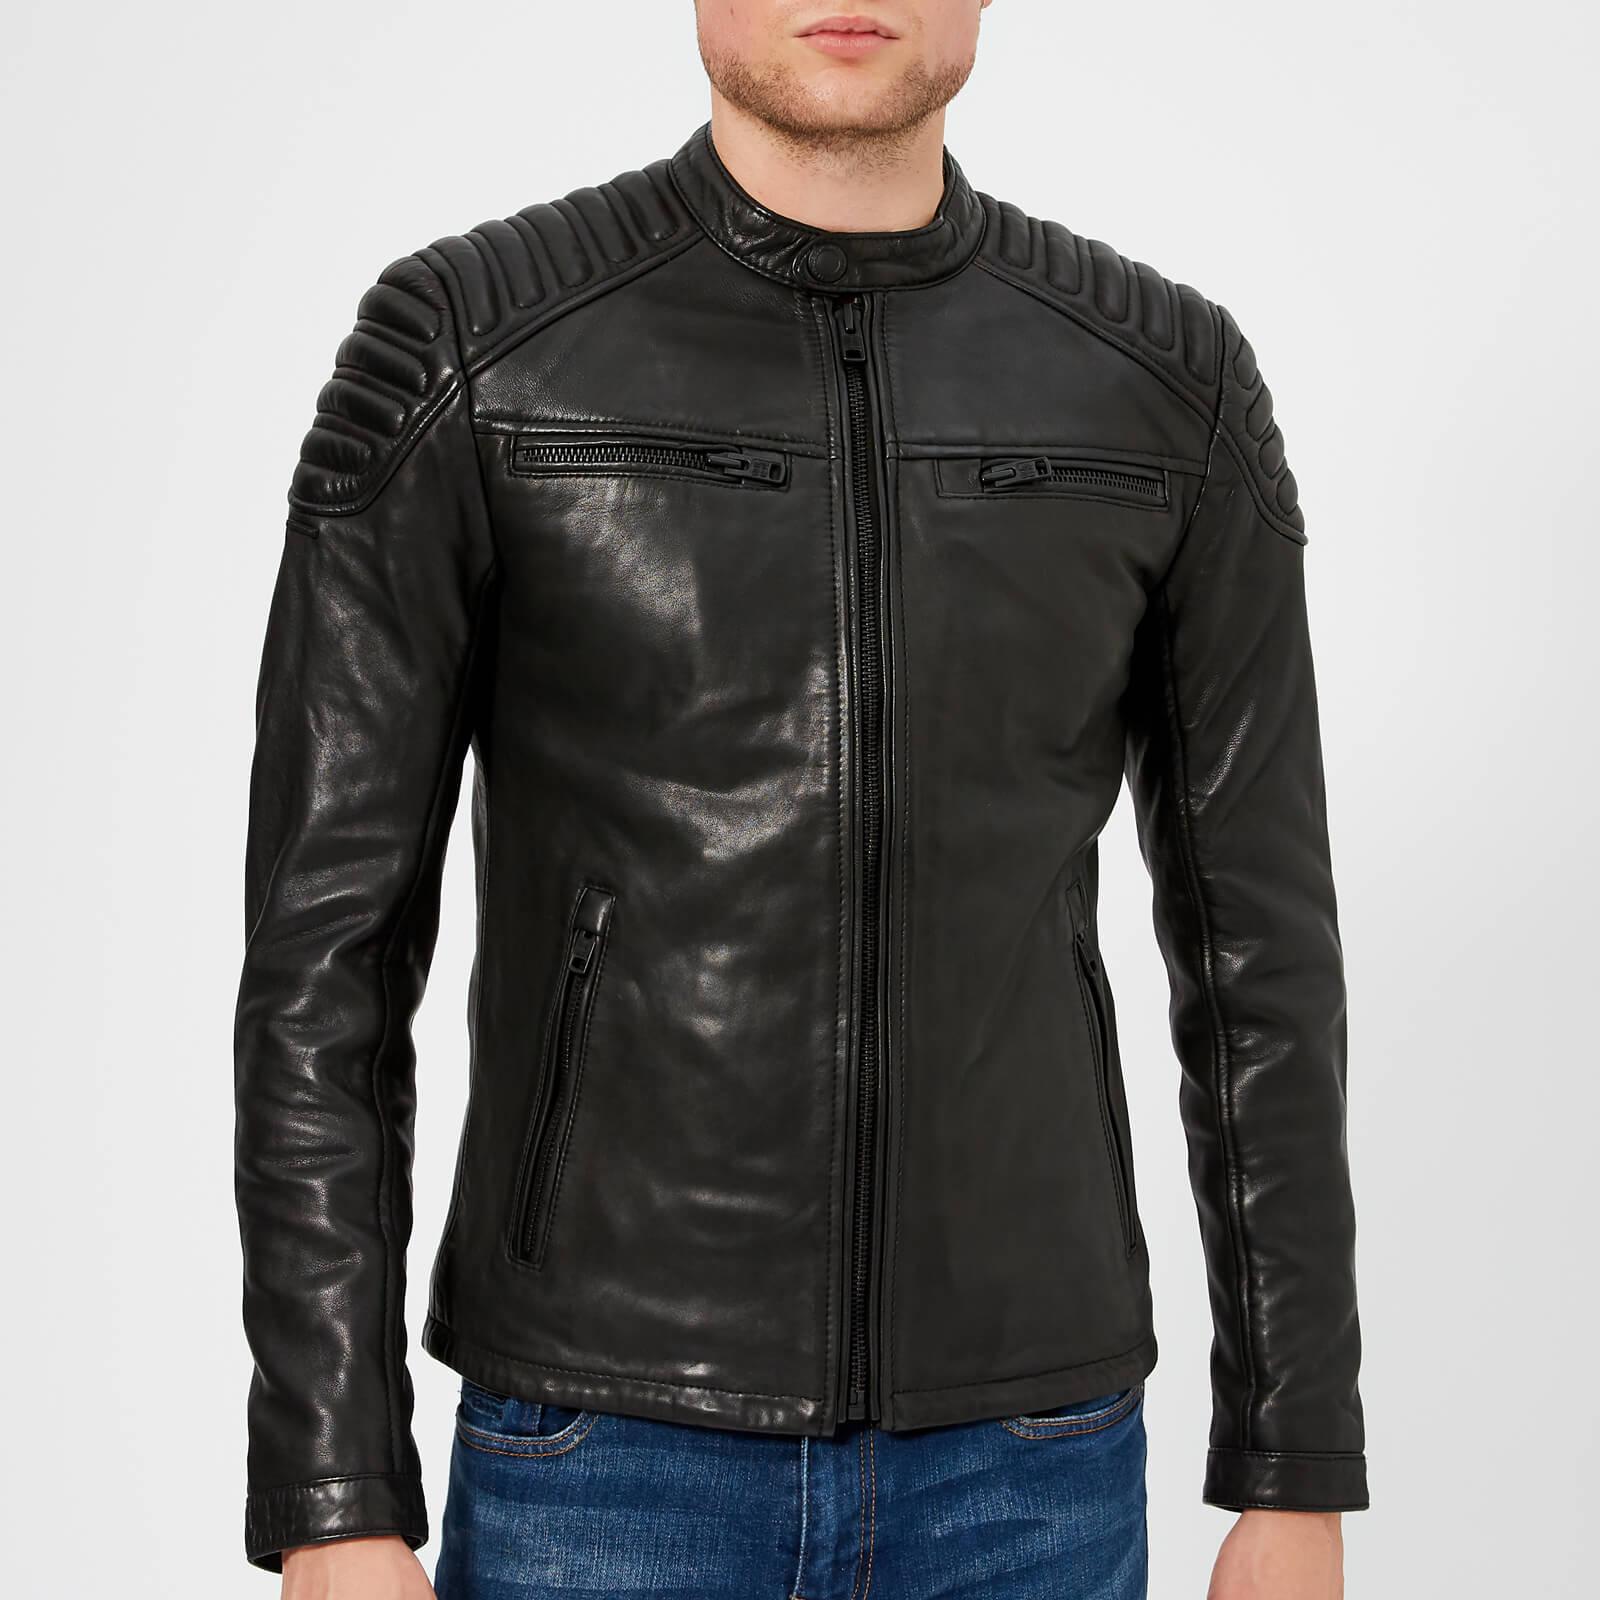 Superdry New Hero Leather Jacket in Black for Men - Lyst